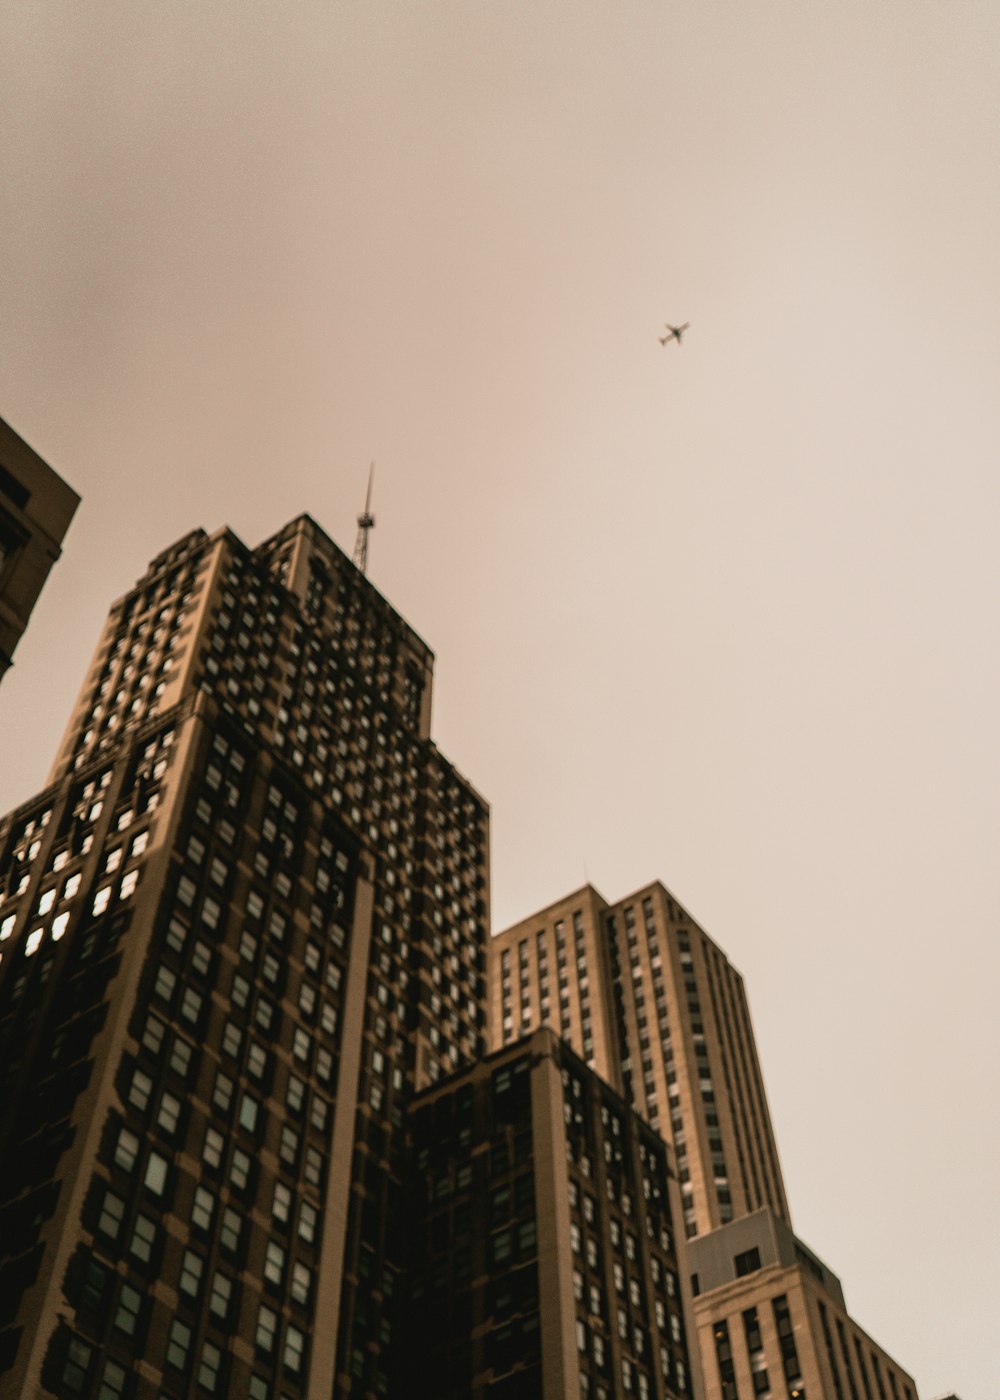 a plane is flying in the sky over some tall buildings